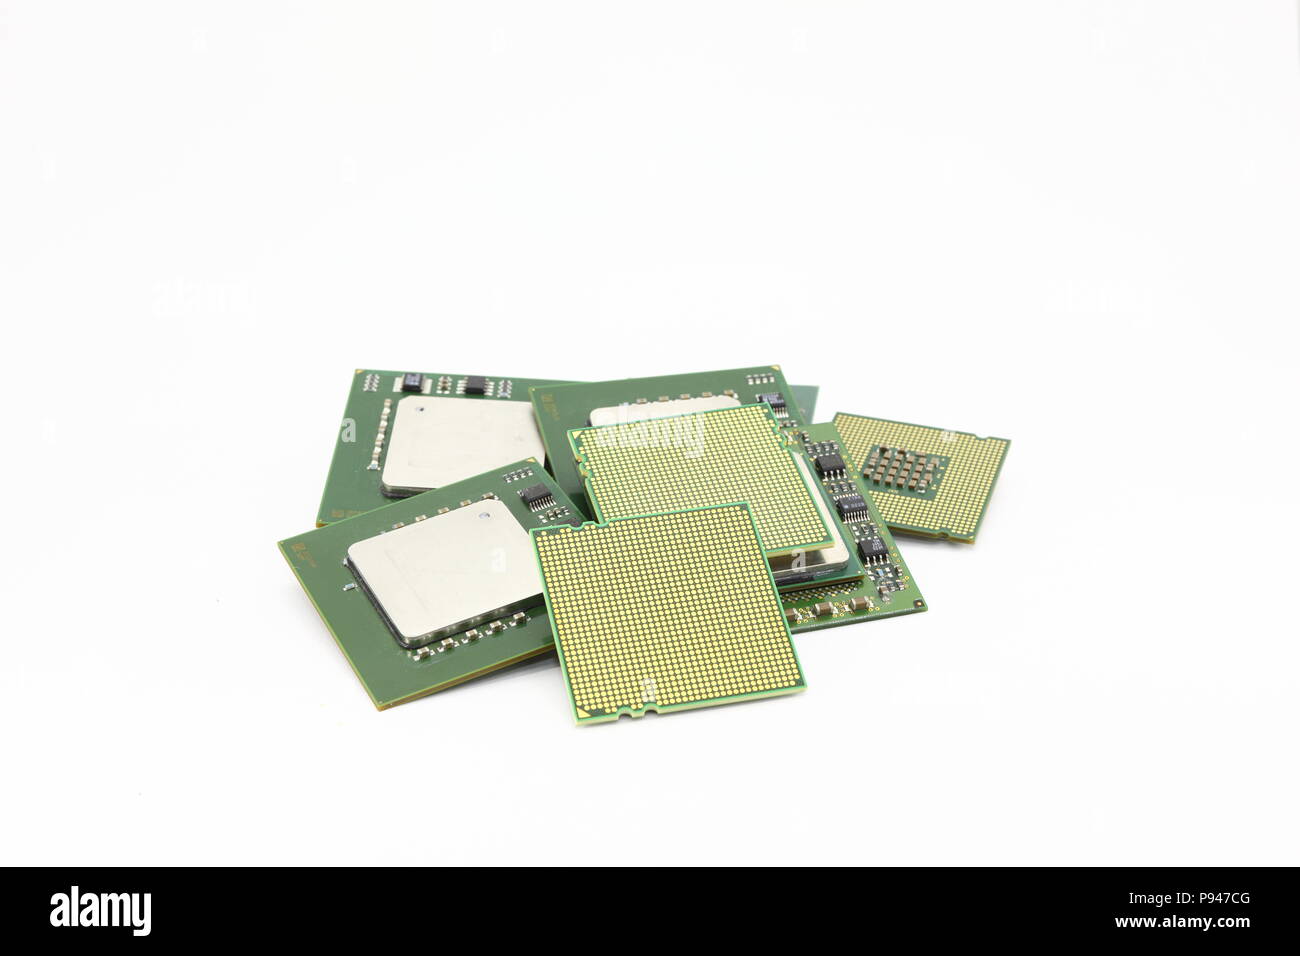 vareity of computer CPU, Processor Isolated on white background. Stock Photo